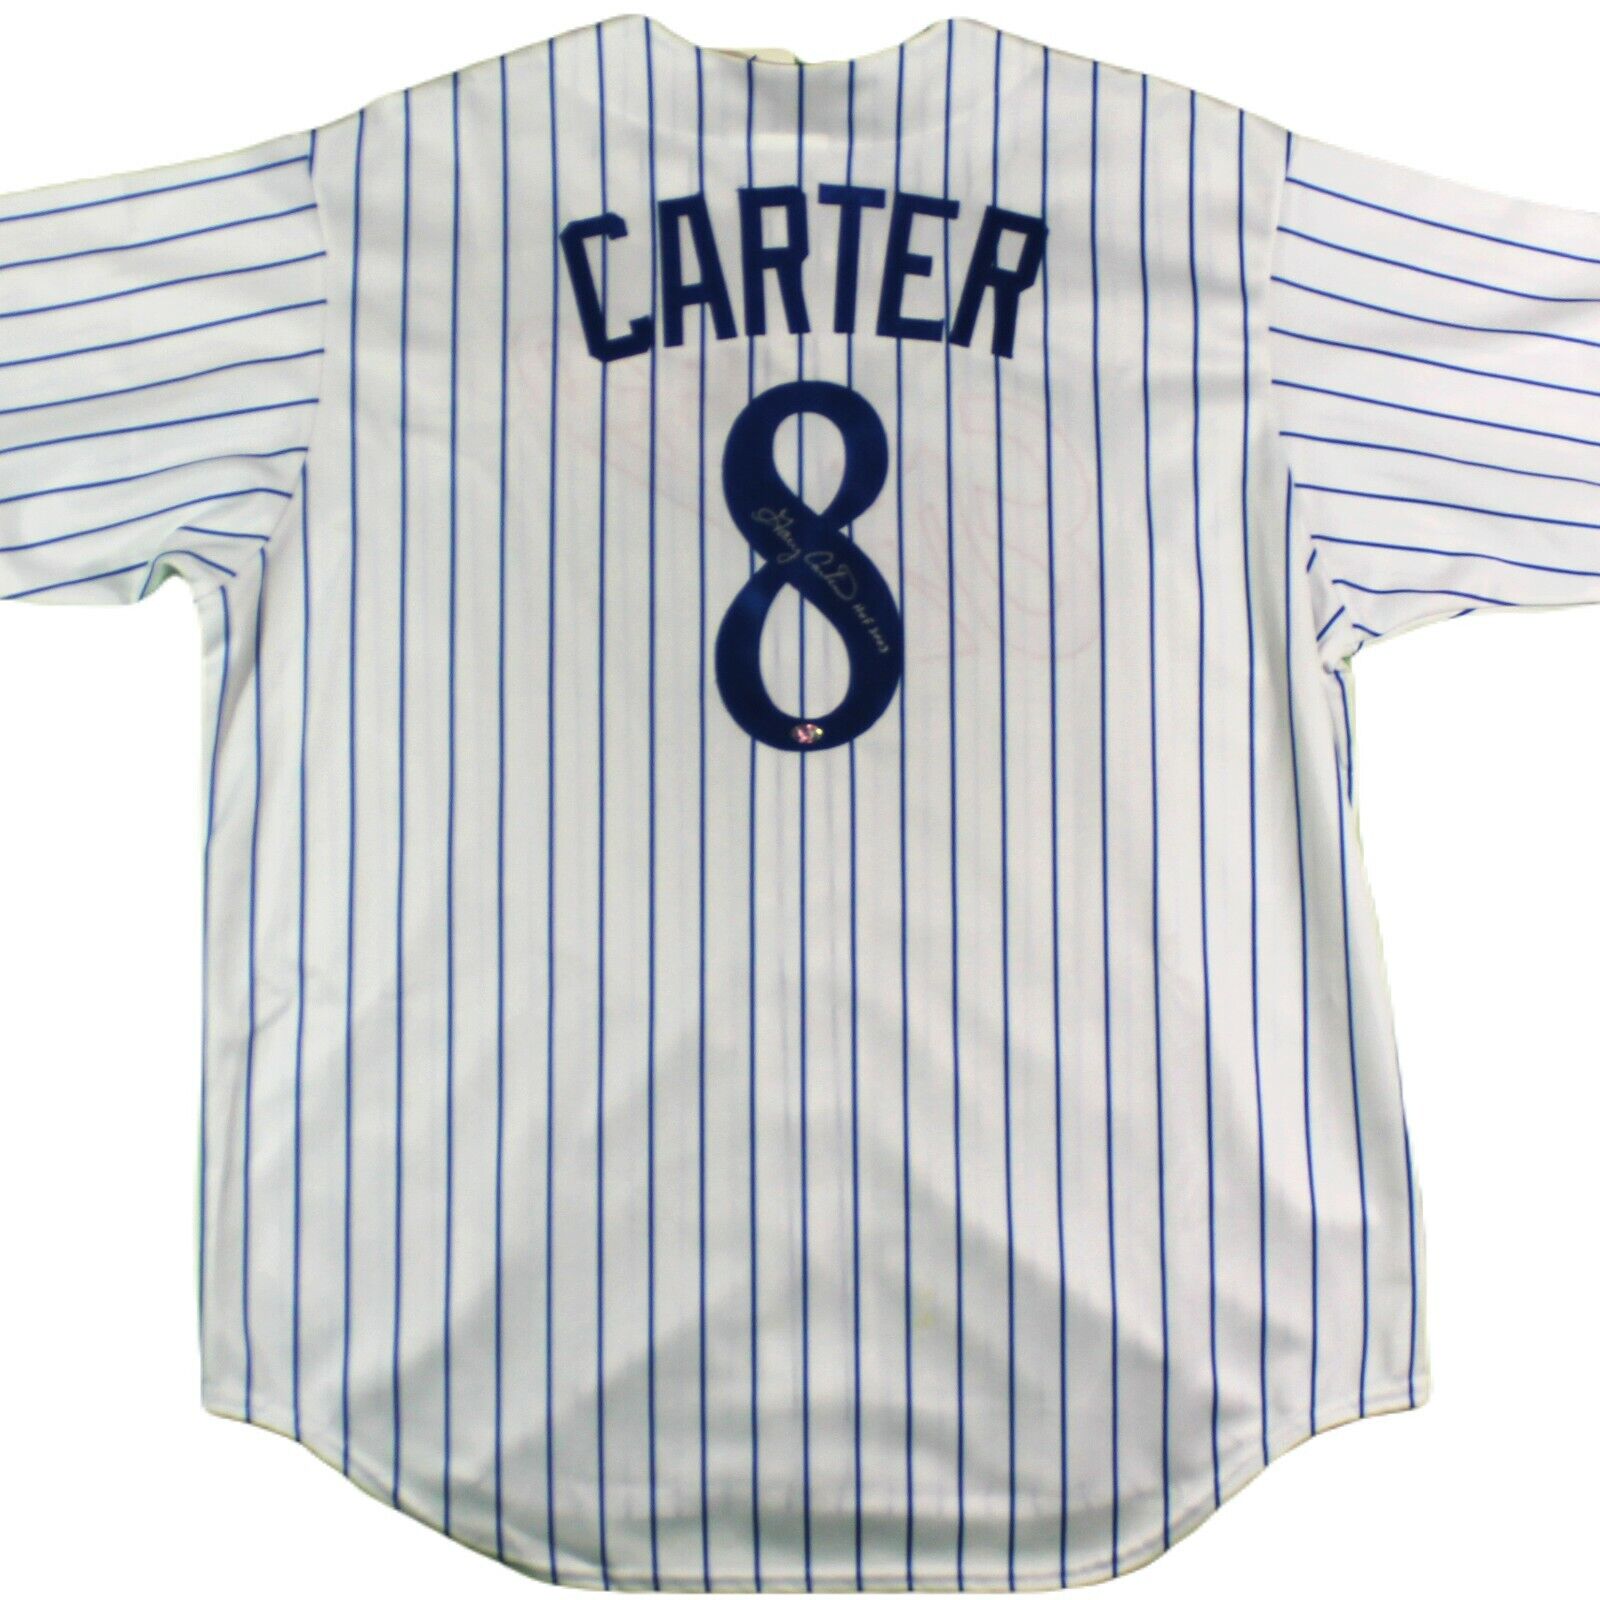 gary carter autographed jersey